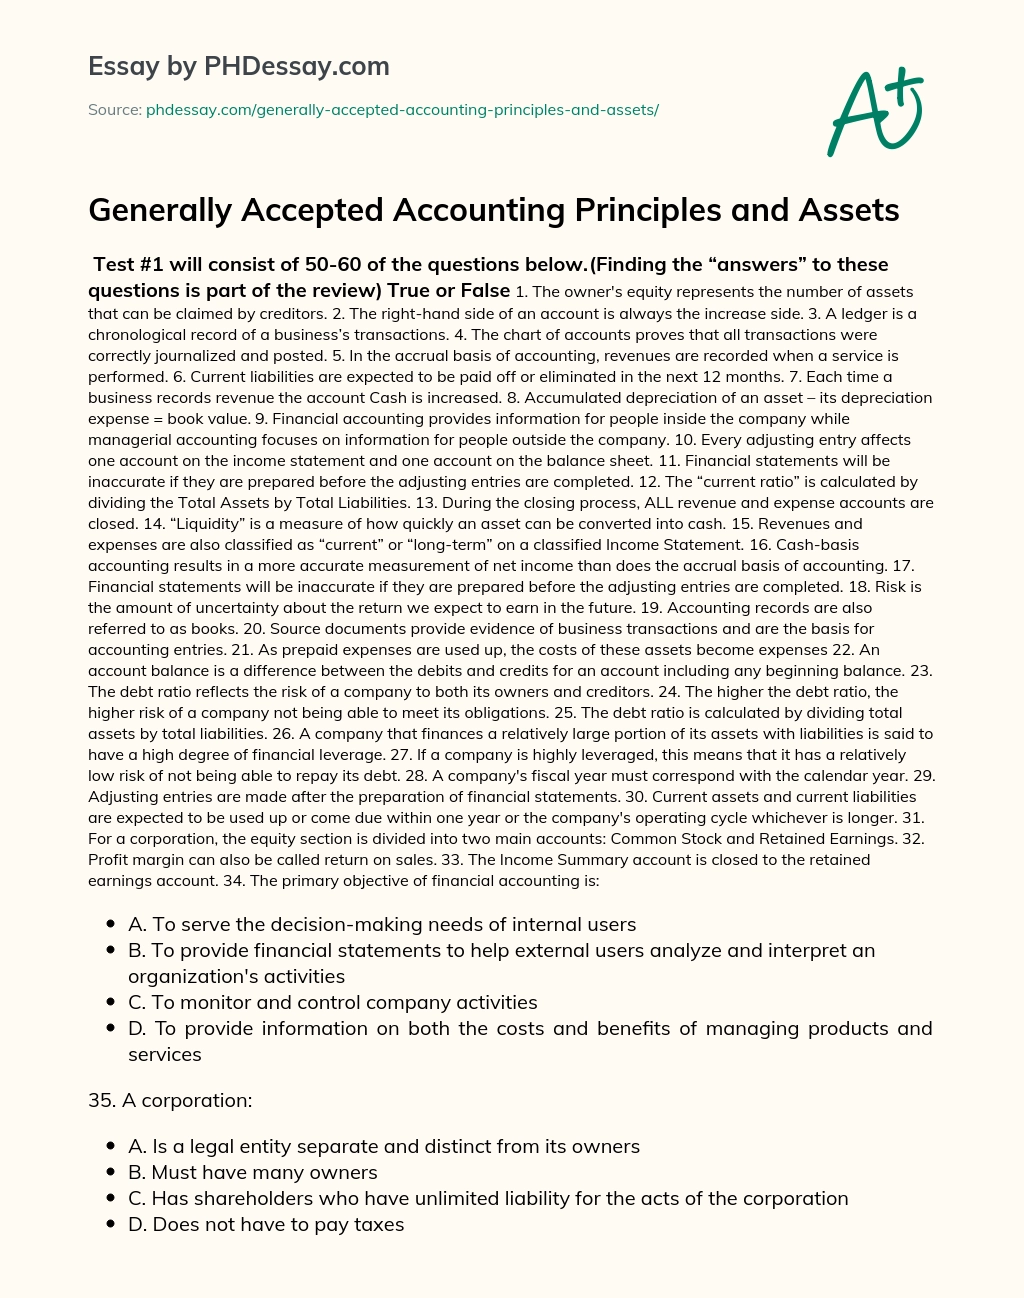 Generally Accepted Accounting Principles and Assets essay